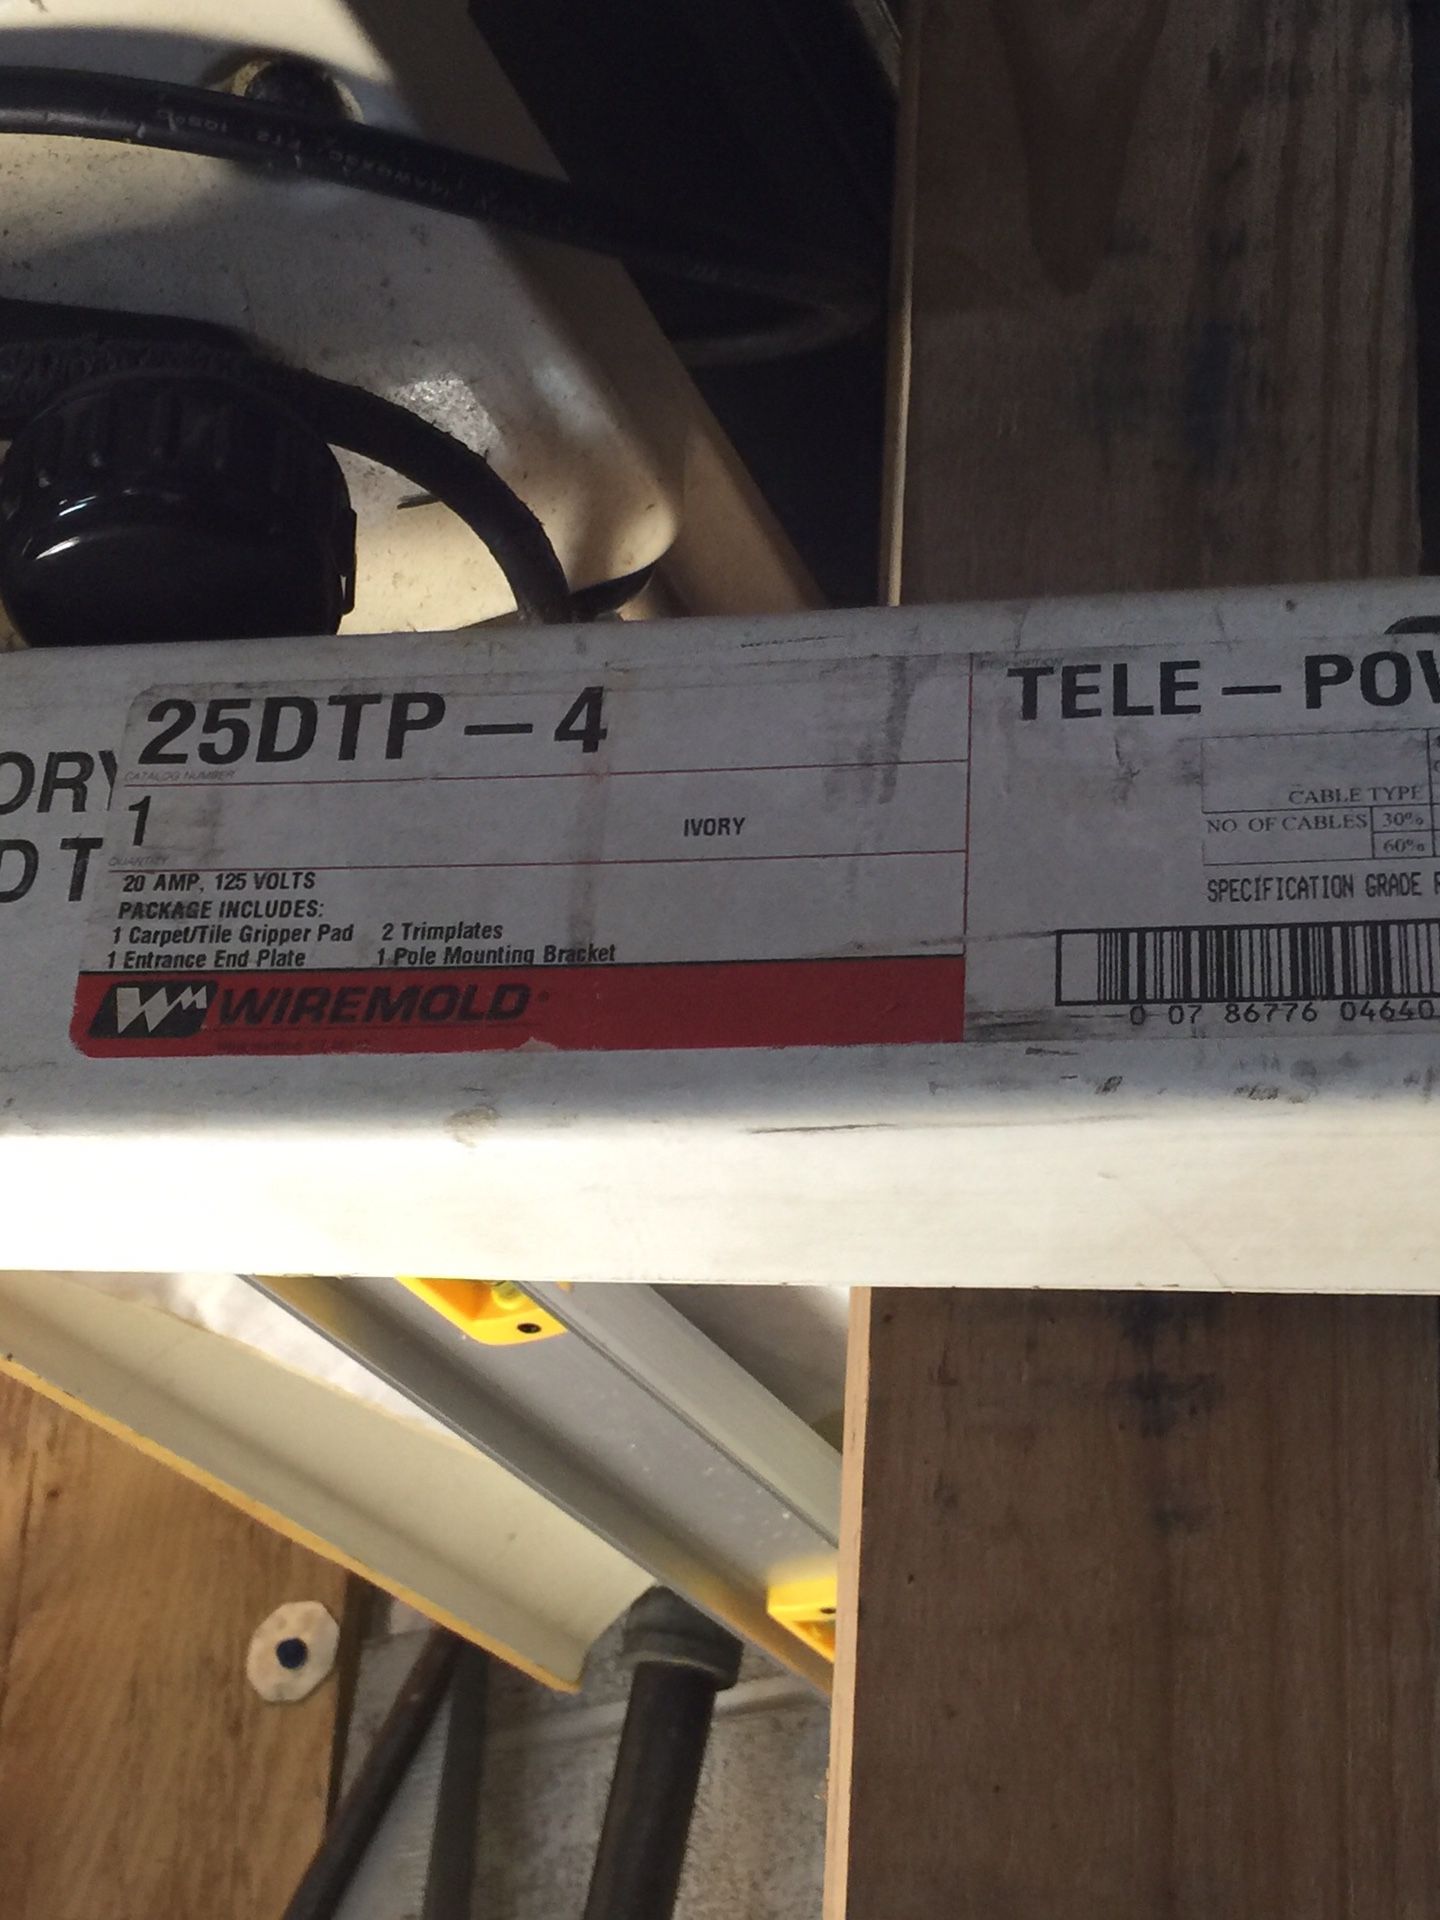 Wiremold power pole 25DTP-4